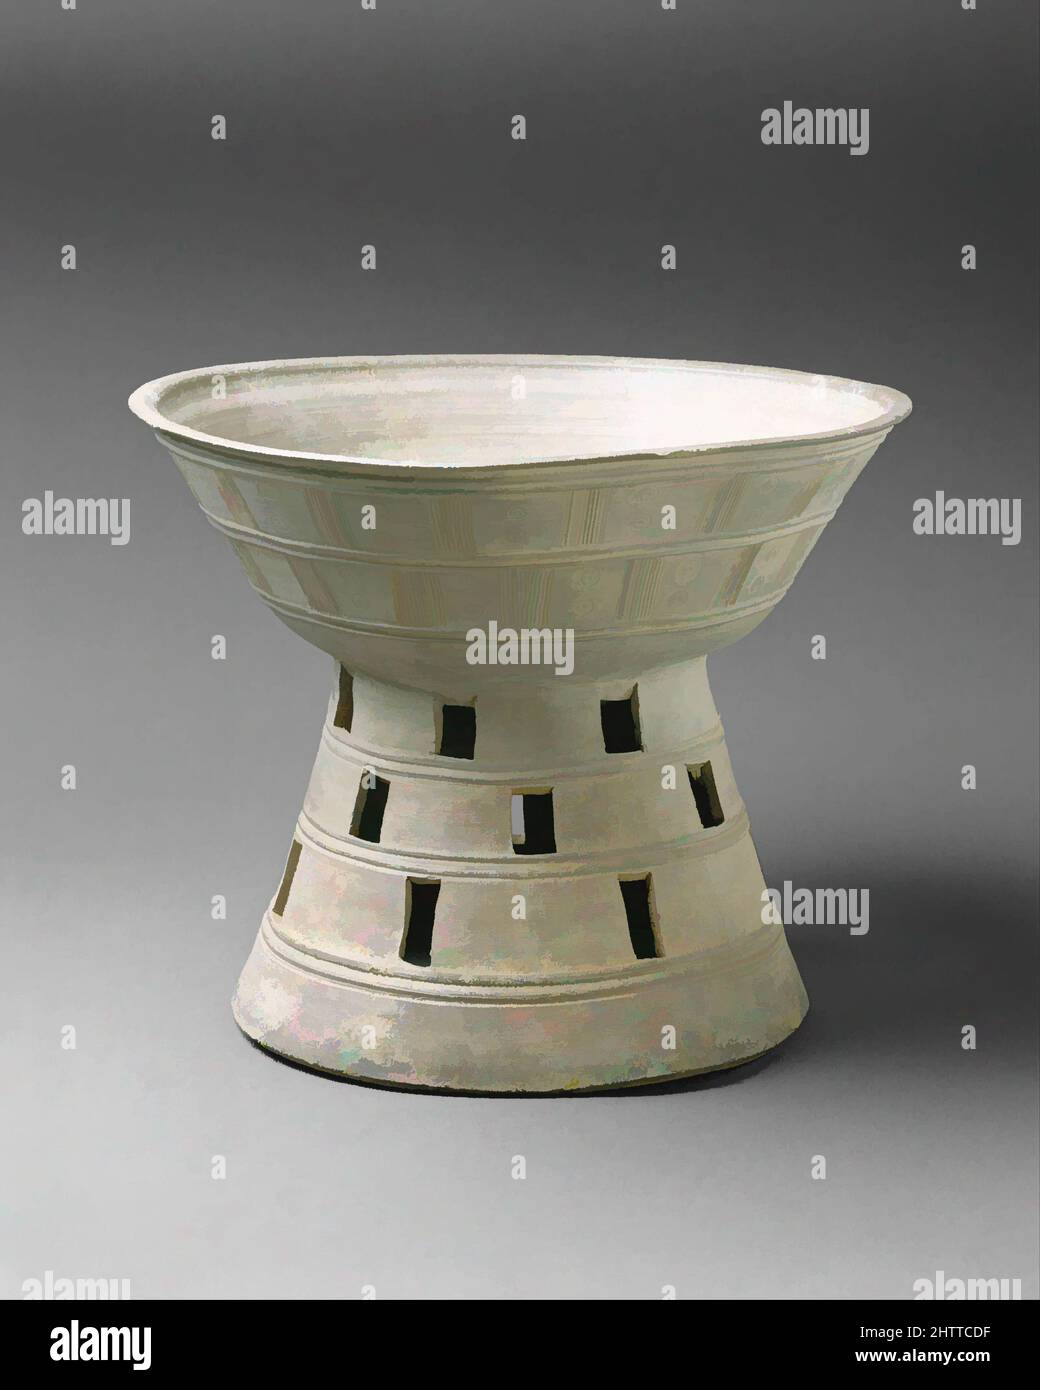 Art inspired by Stand with perforated base, 그릇받침 삼국, 신라, Three Kingdoms period, Silla Kingdom (57 B.C.–A.D. 676), 5th–6th century, Korea, Stoneware with traces of ash glaze, H. 16 in. (40.6 cm), Ceramics, Classic works modernized by Artotop with a splash of modernity. Shapes, color and value, eye-catching visual impact on art. Emotions through freedom of artworks in a contemporary way. A timeless message pursuing a wildly creative new direction. Artists turning to the digital medium and creating the Artotop NFT Stock Photo